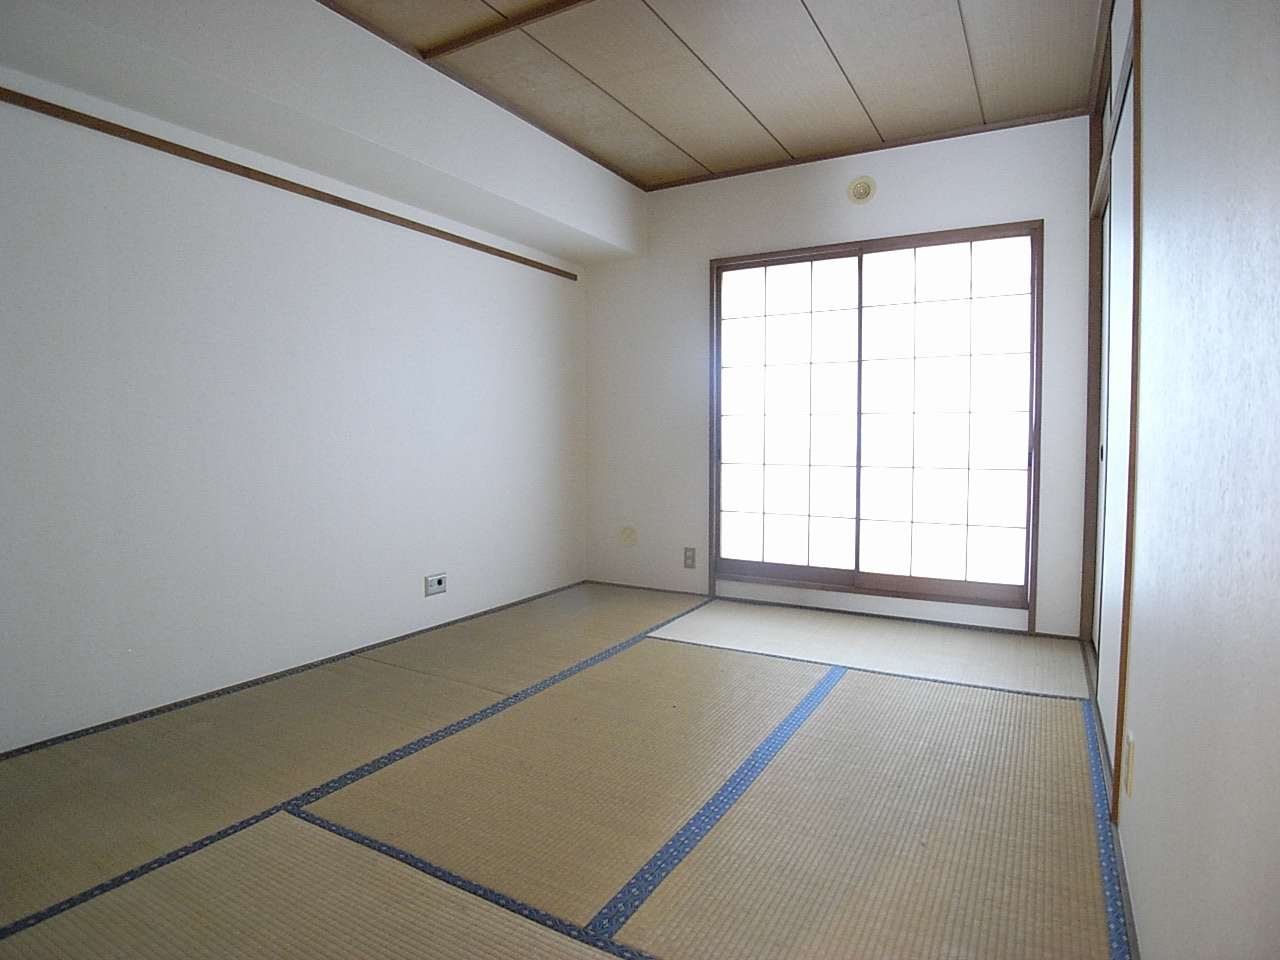 Other. The first floor north side Japanese-style room